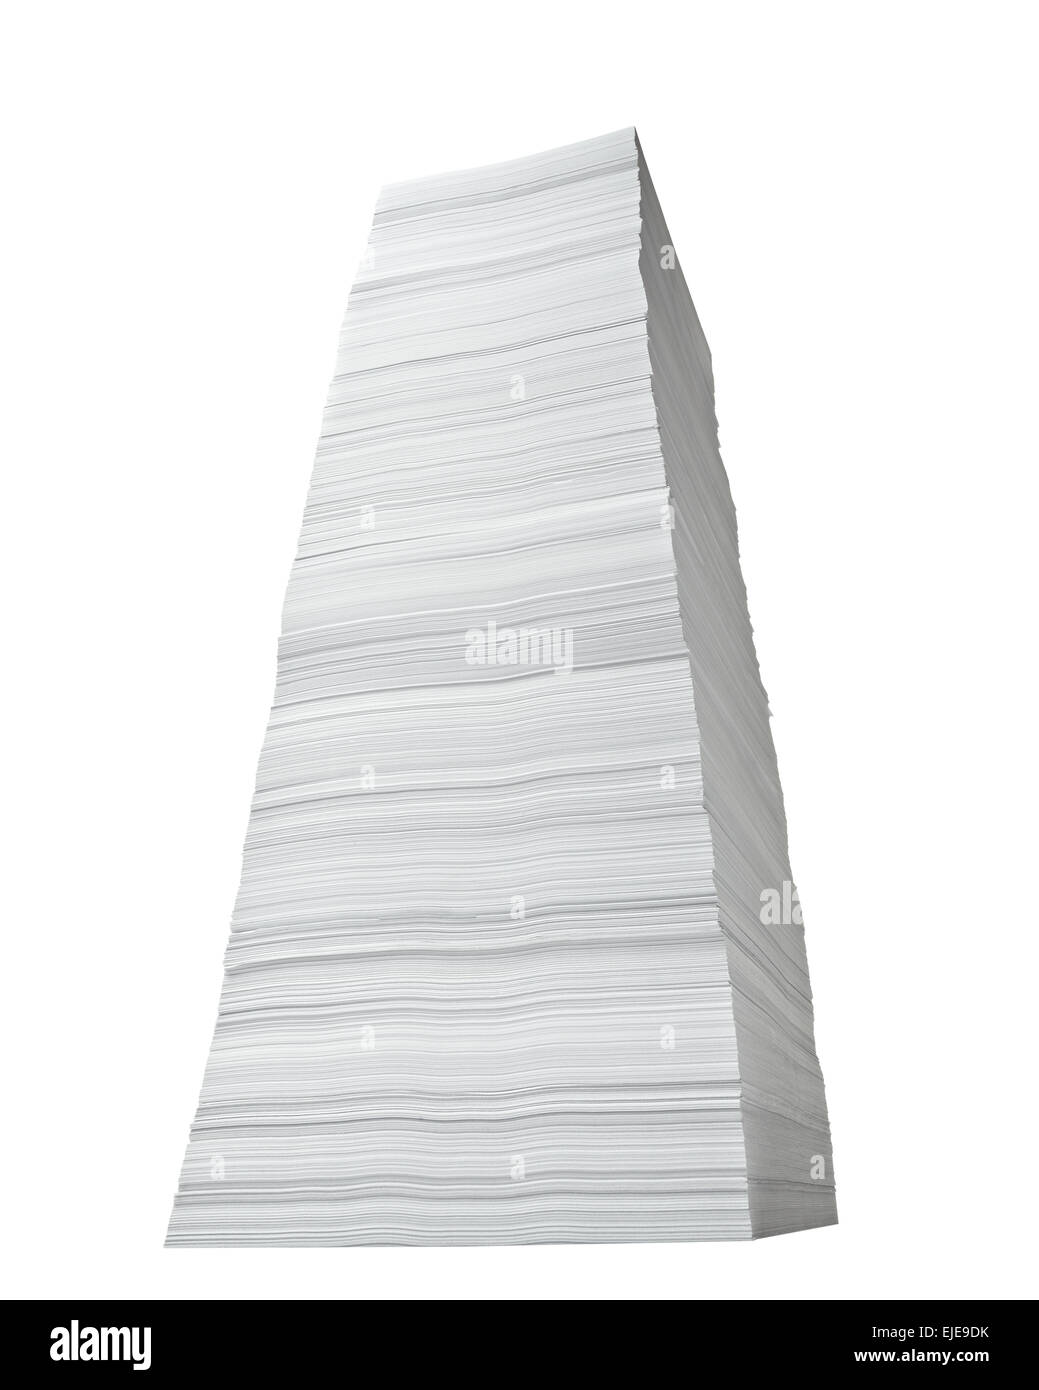 paper stack document Stock Photo